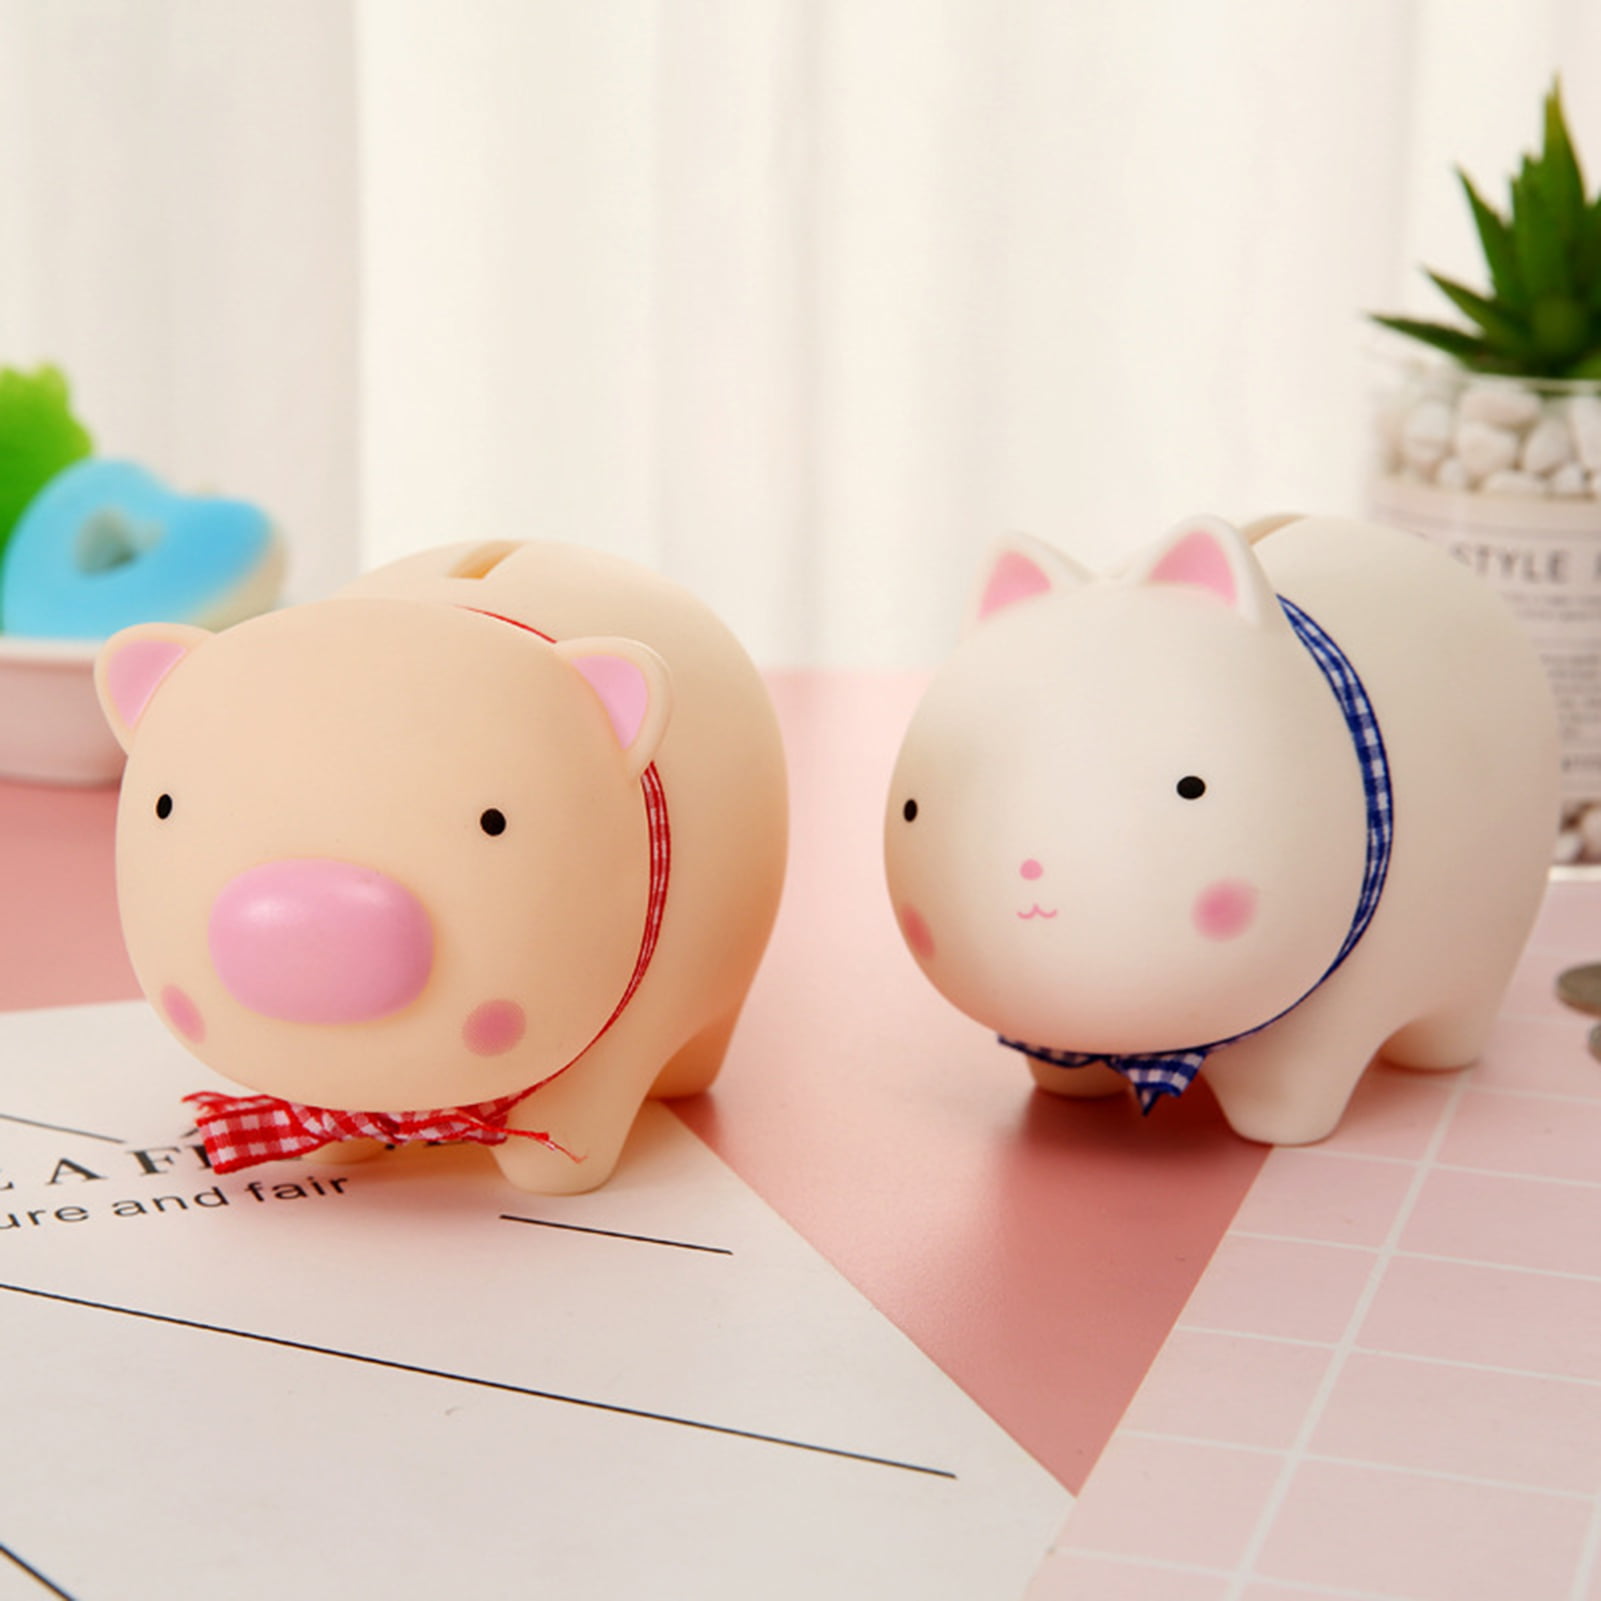 YSMYWM Cute Cow Ceramic Piggy Bank Personalized Money Saving Bank for Kids Gift Red 